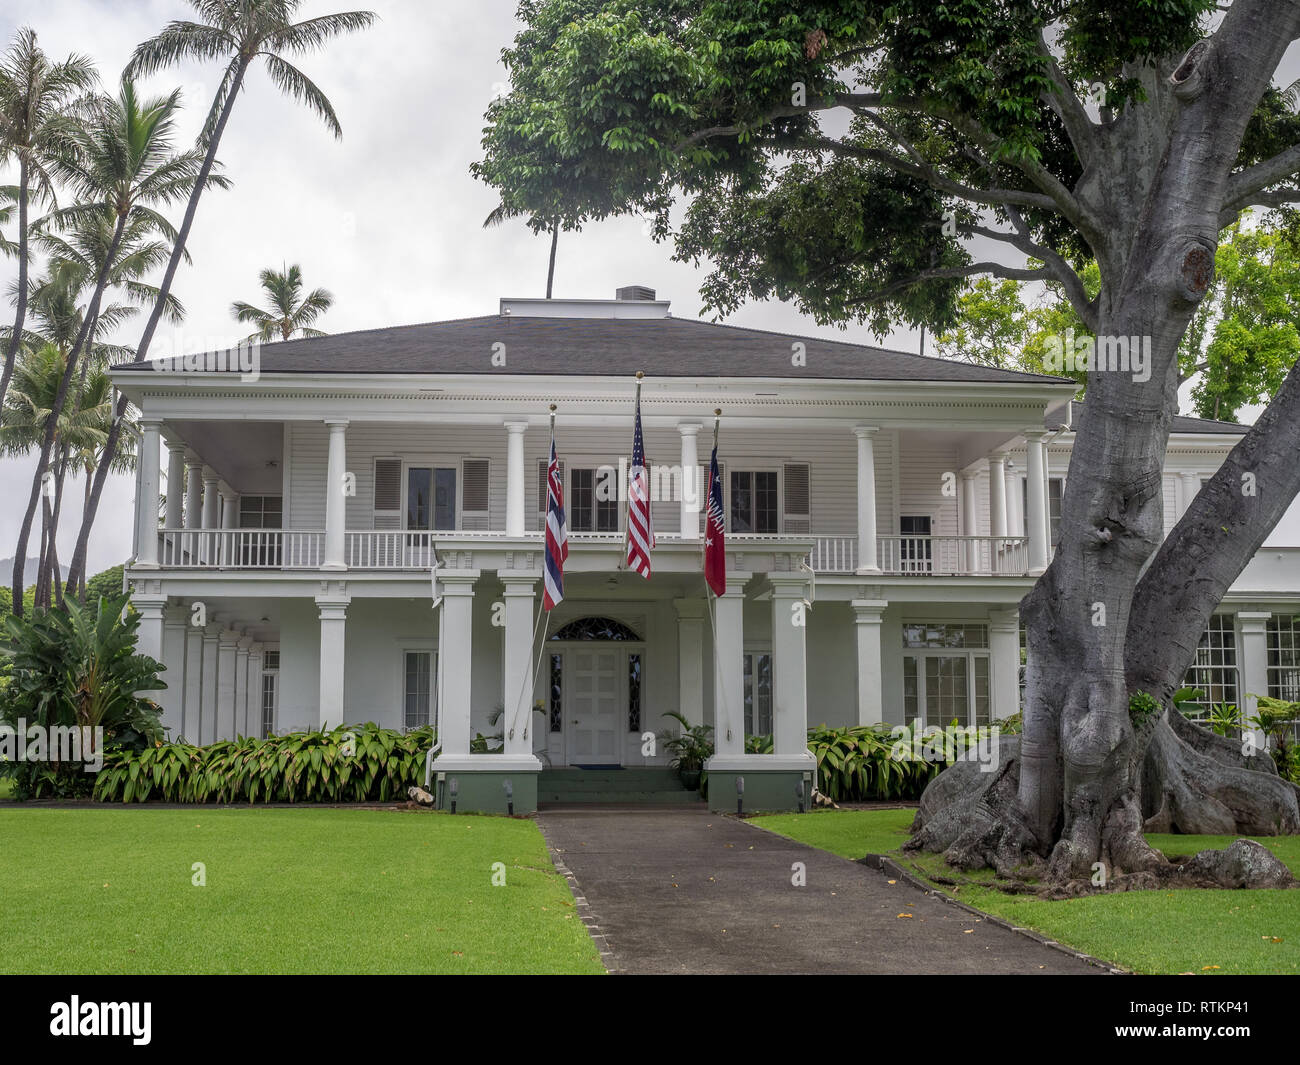 Washington Place on August 6, 2016 in Honolulu Hawaii. It is a Greek Revival palace in the Hawaii Capital Historic District in Honolulu, Hawaii. It is Stock Photo